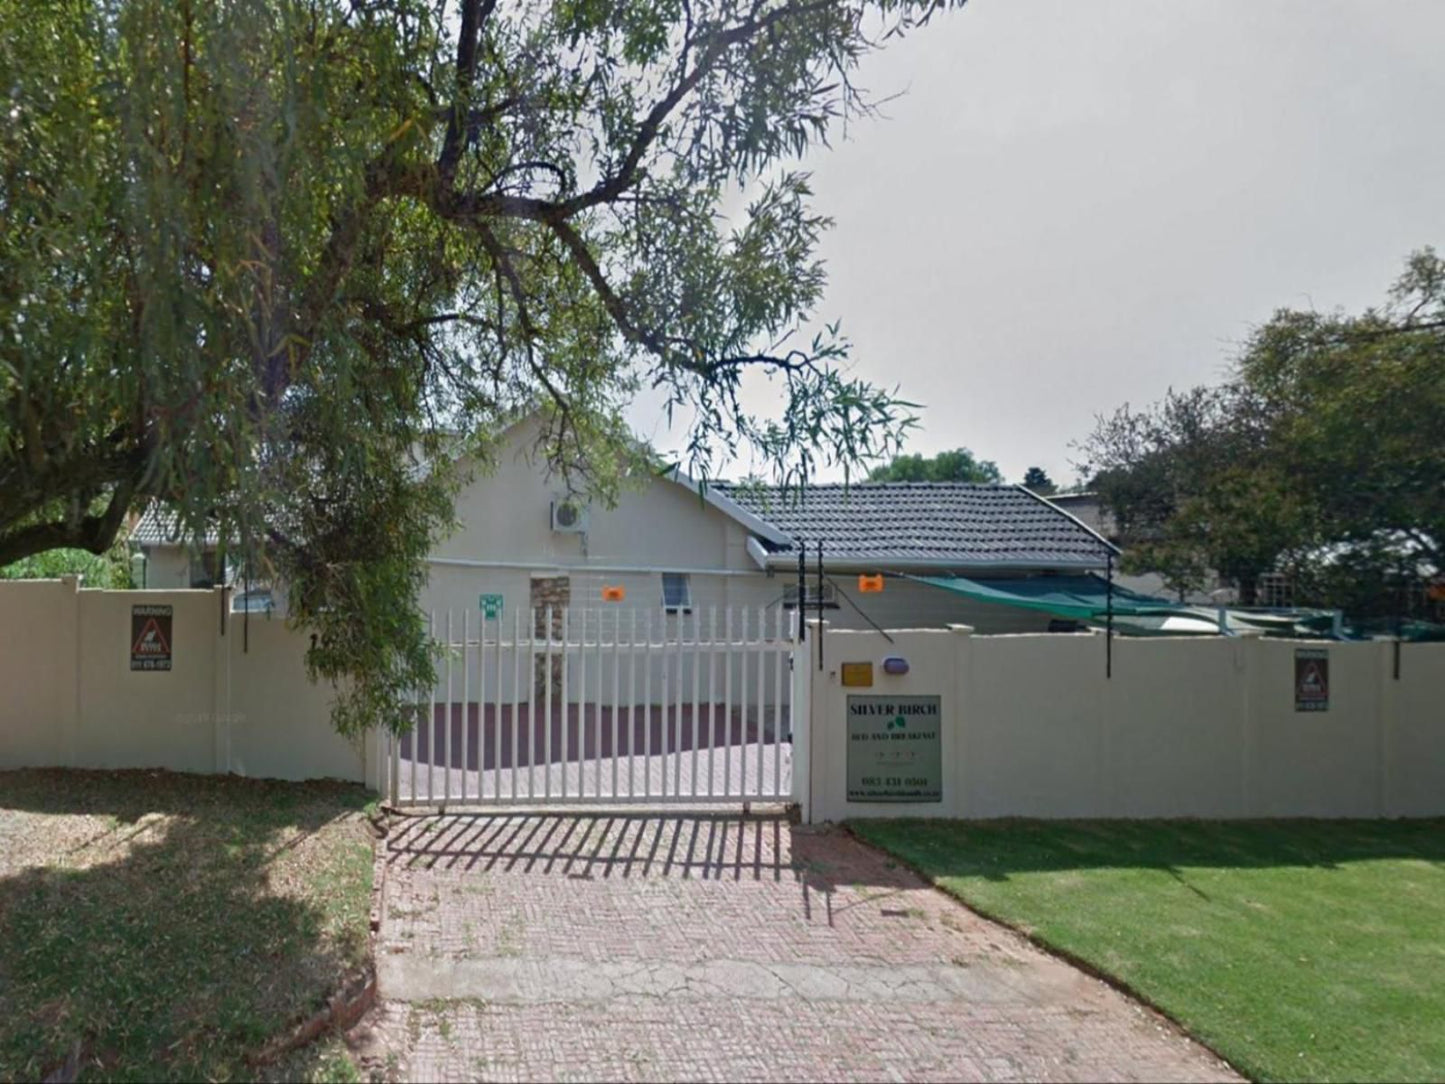 Silver Birch Bed And Breakfast Roodepoort Johannesburg Gauteng South Africa House, Building, Architecture